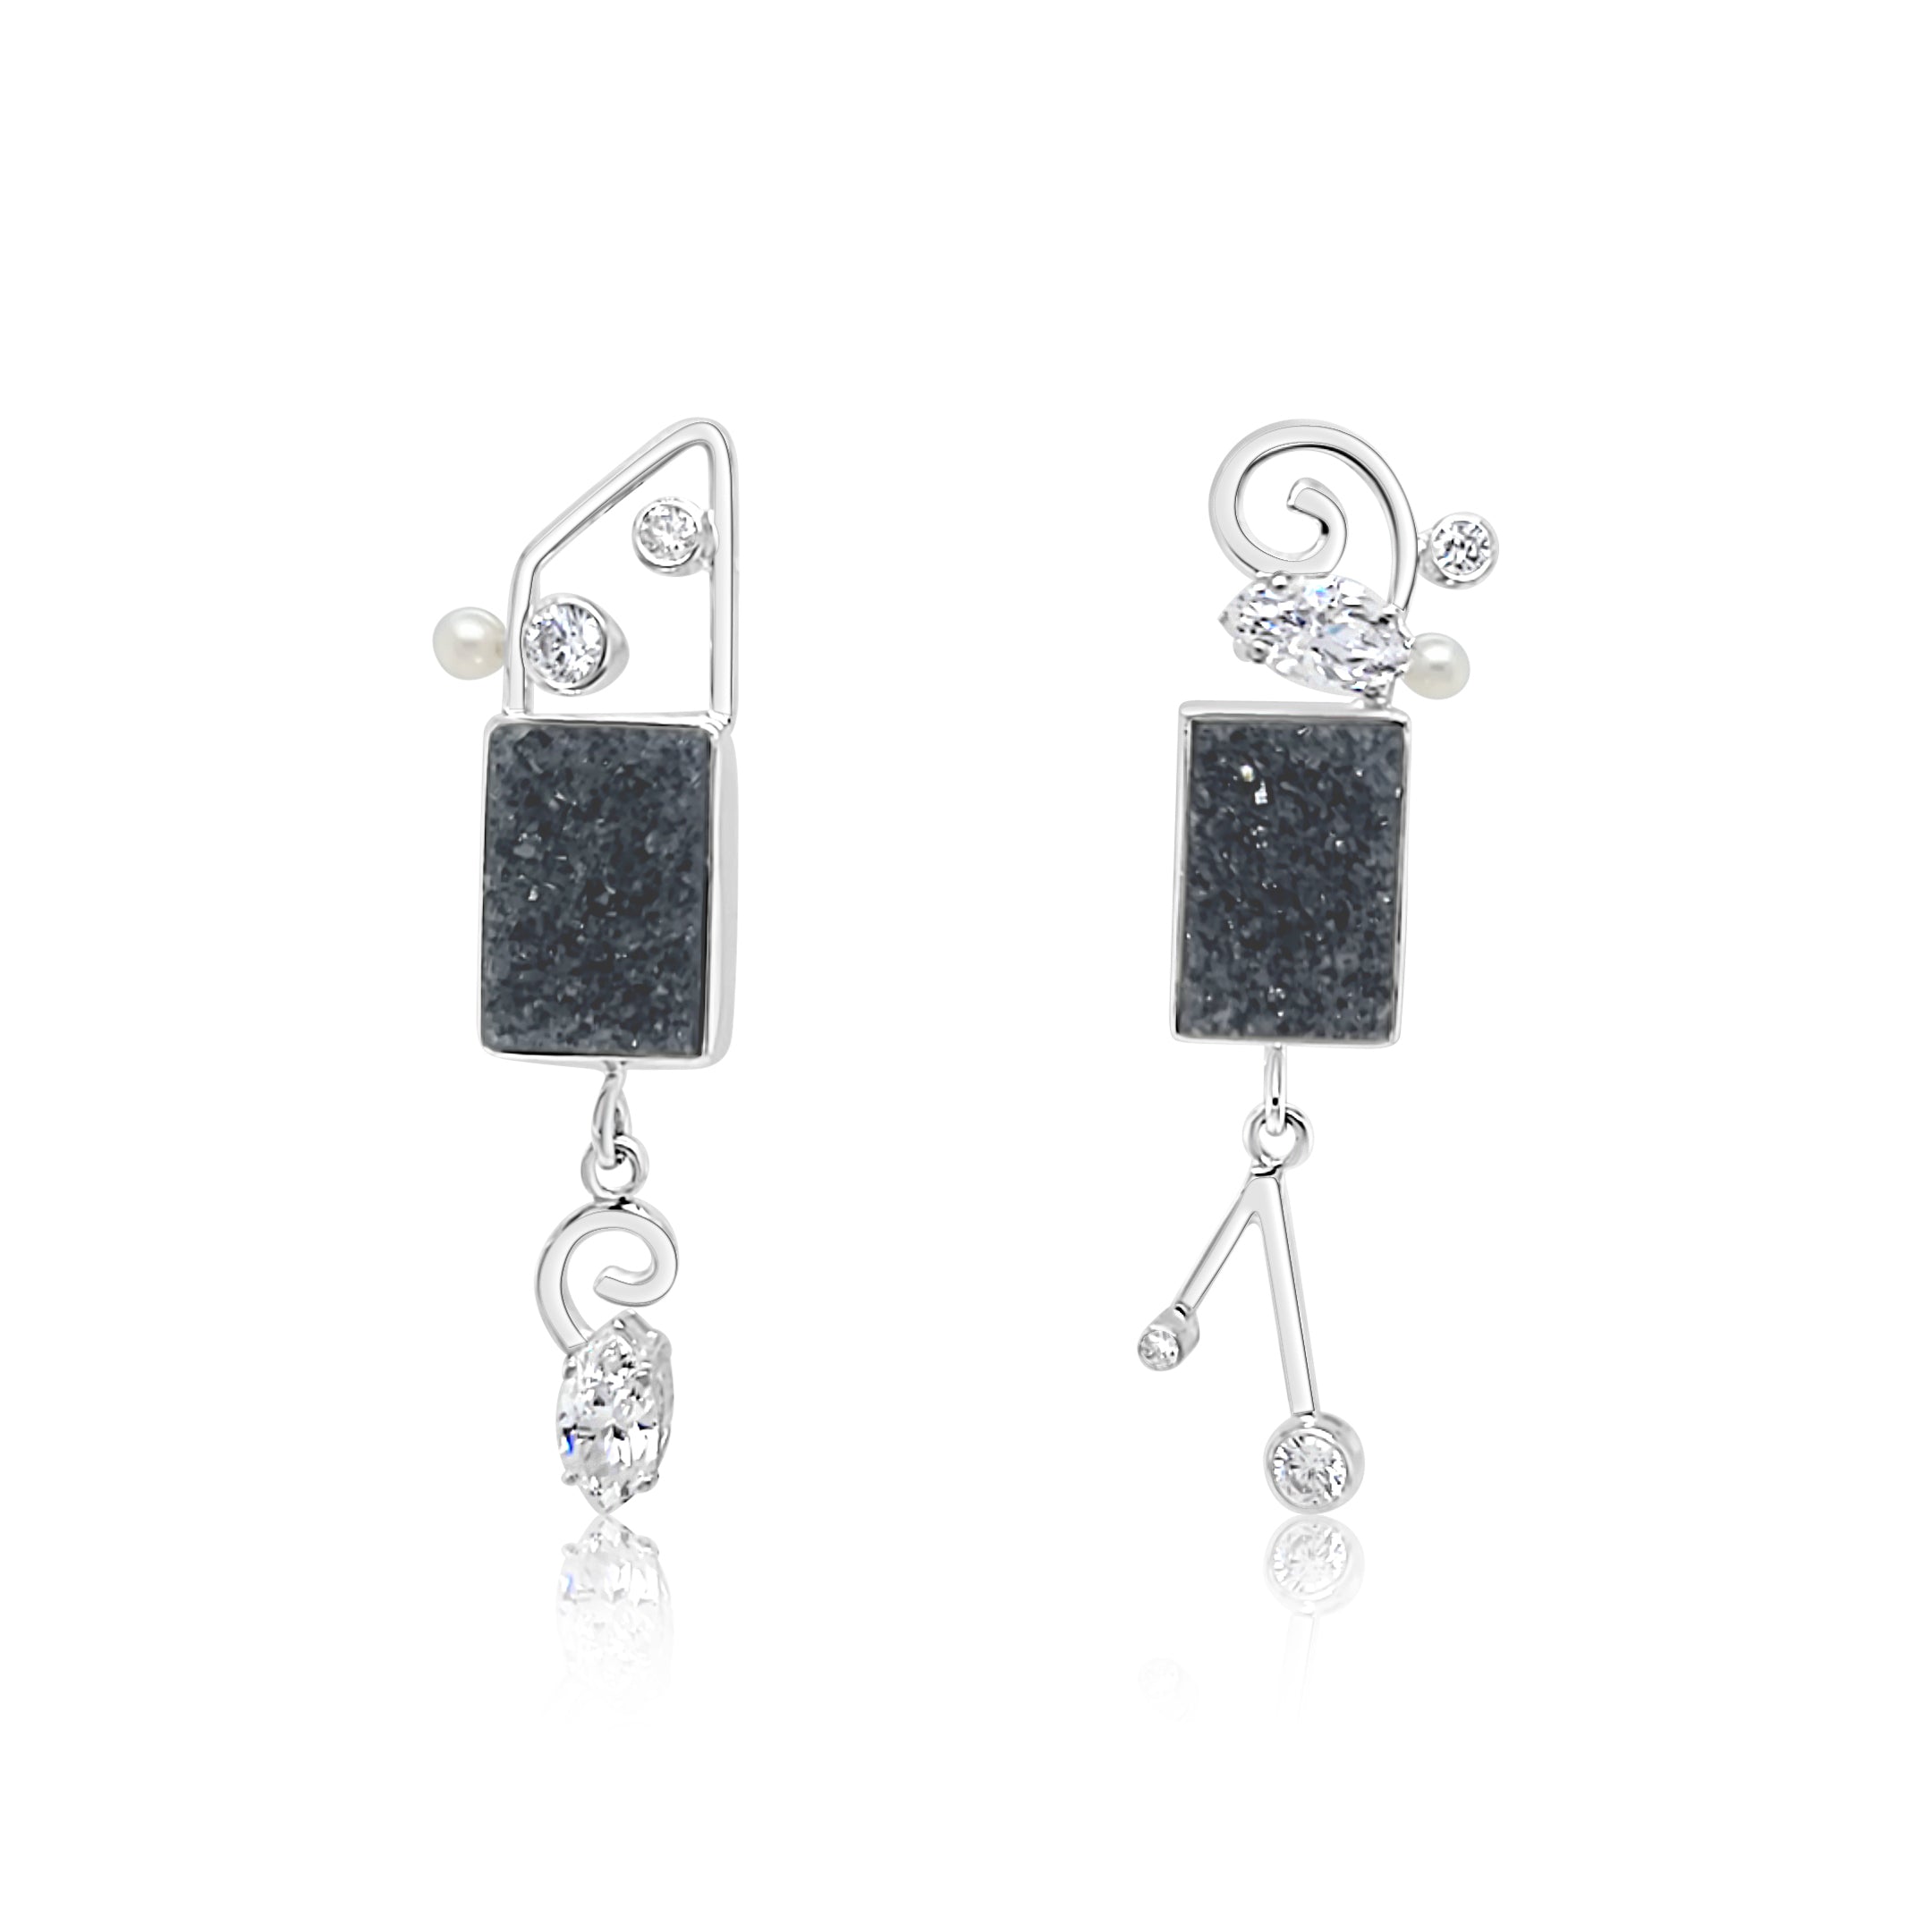 Sterling Silver, Black Onyx Drusy, Cubic Zirconia and Freshwater Pearl earrings